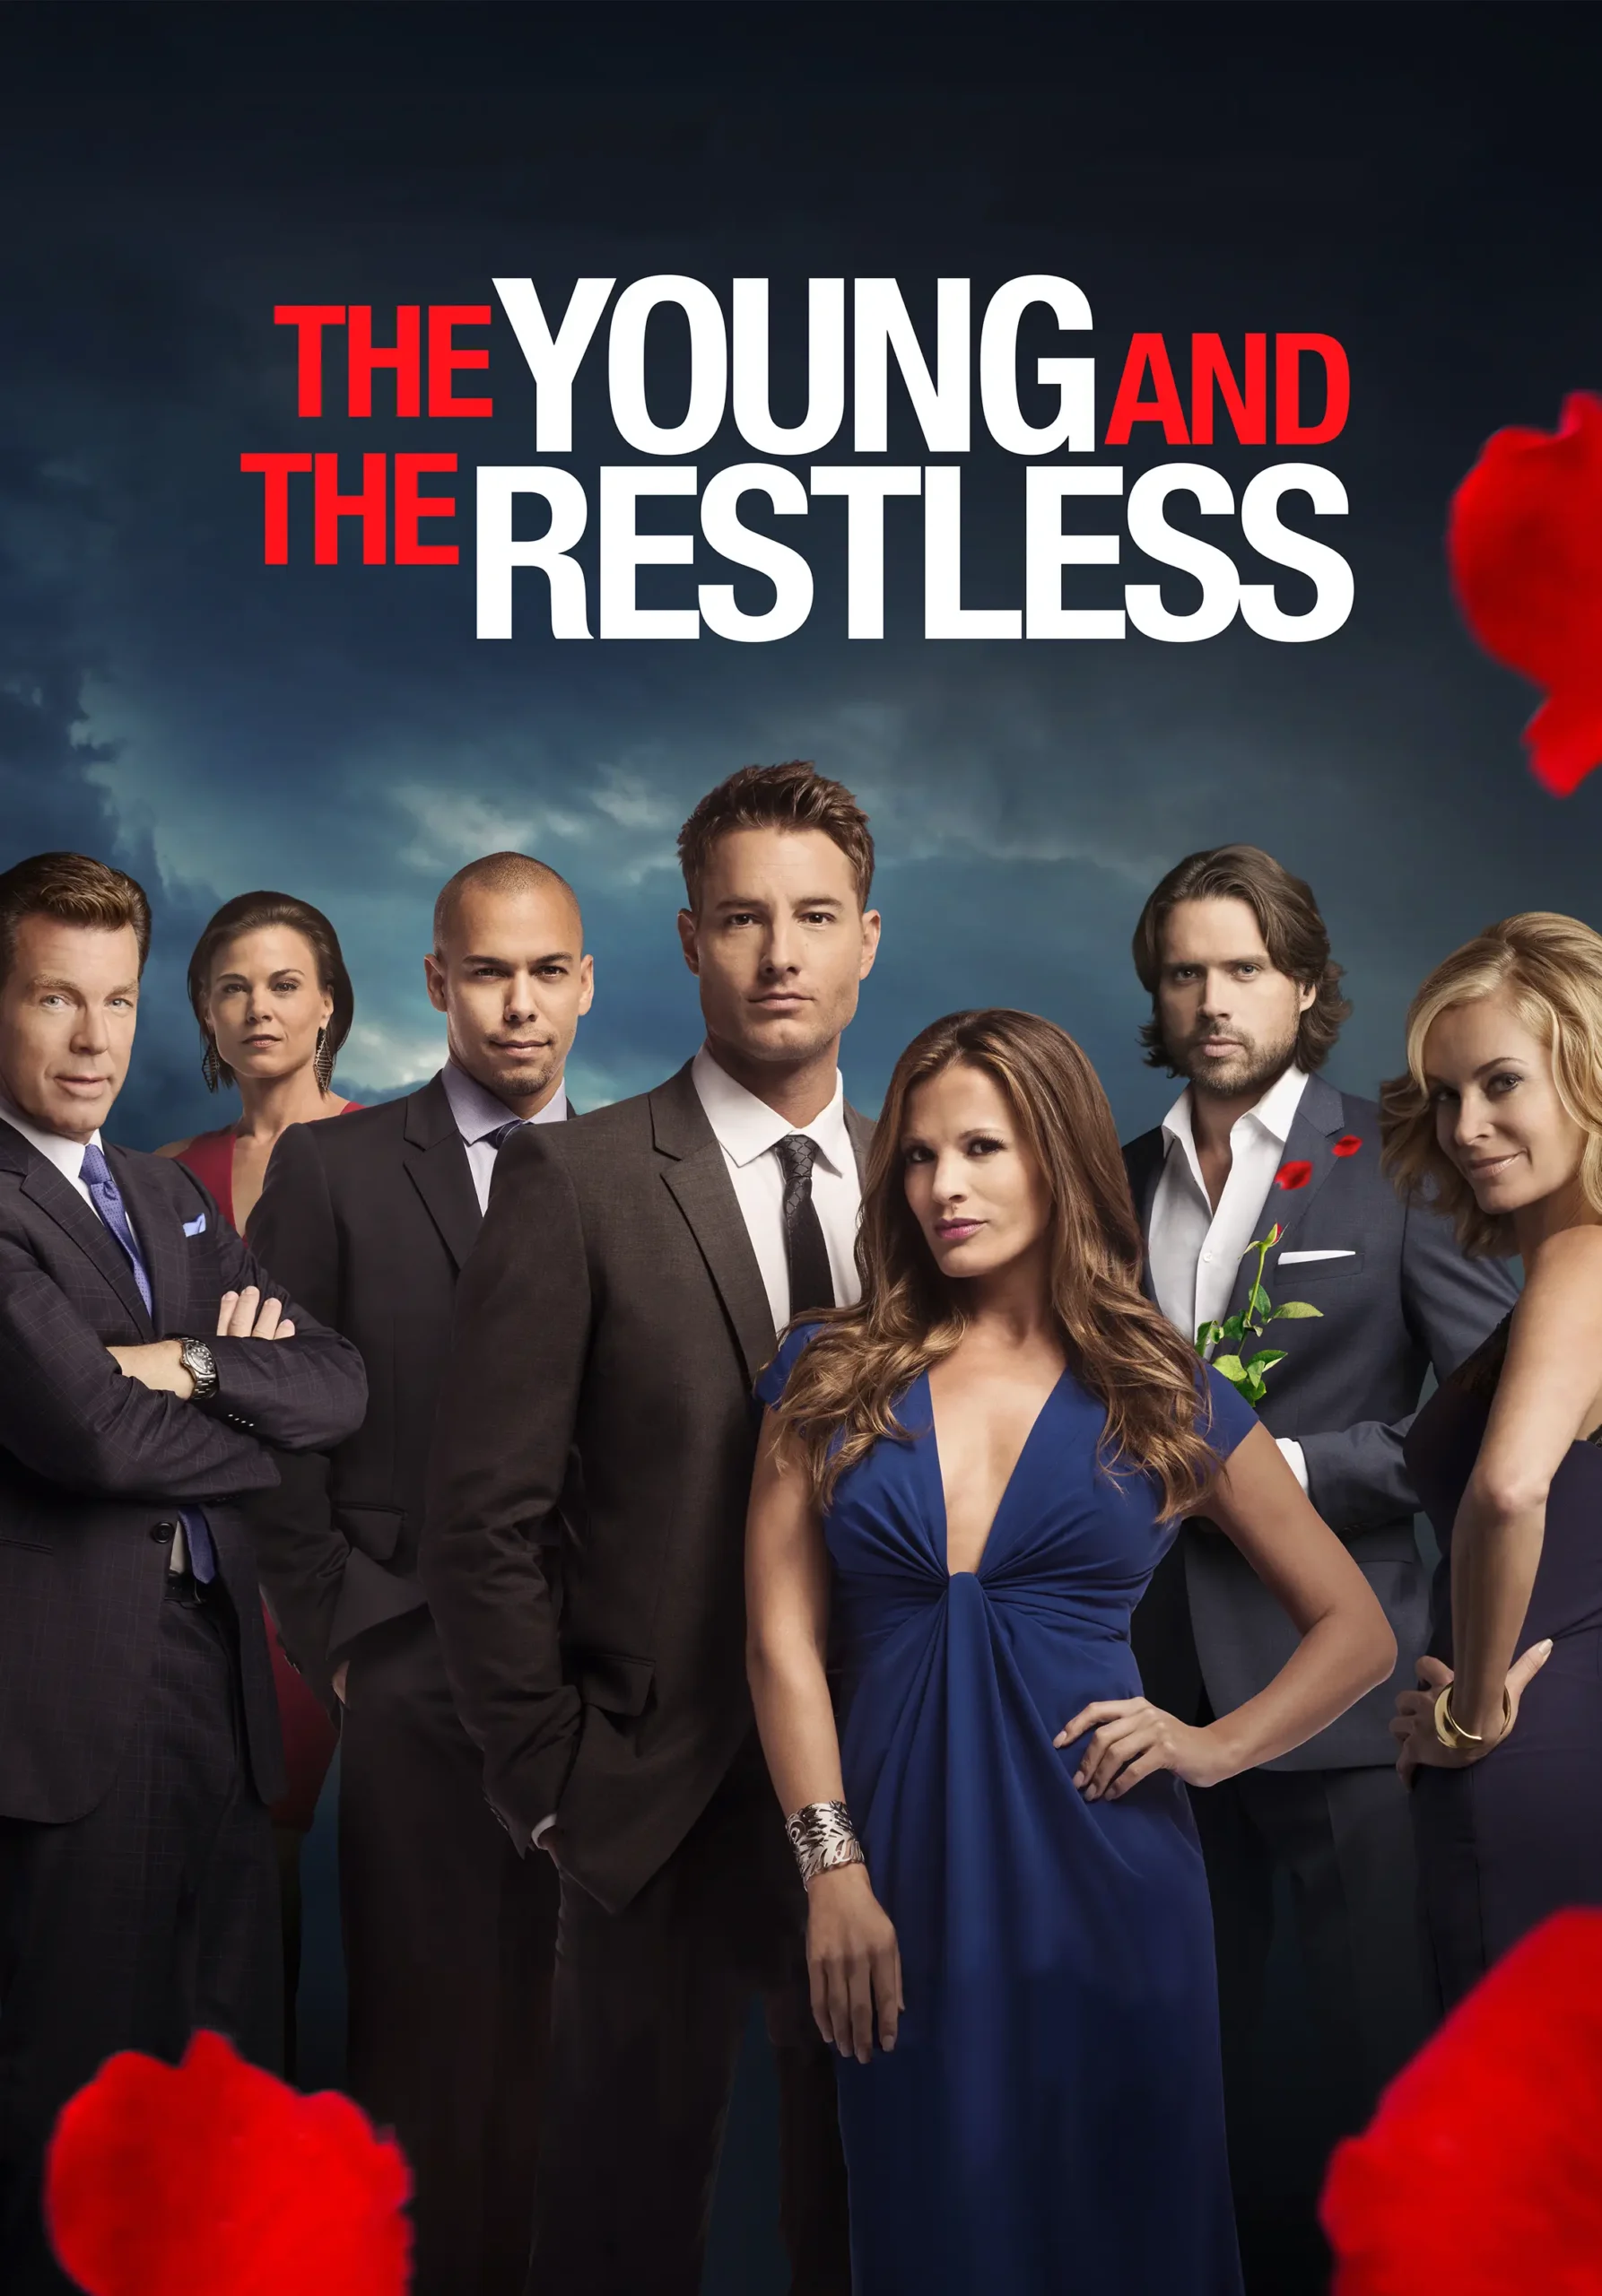 Te Young and the Restless (2017)